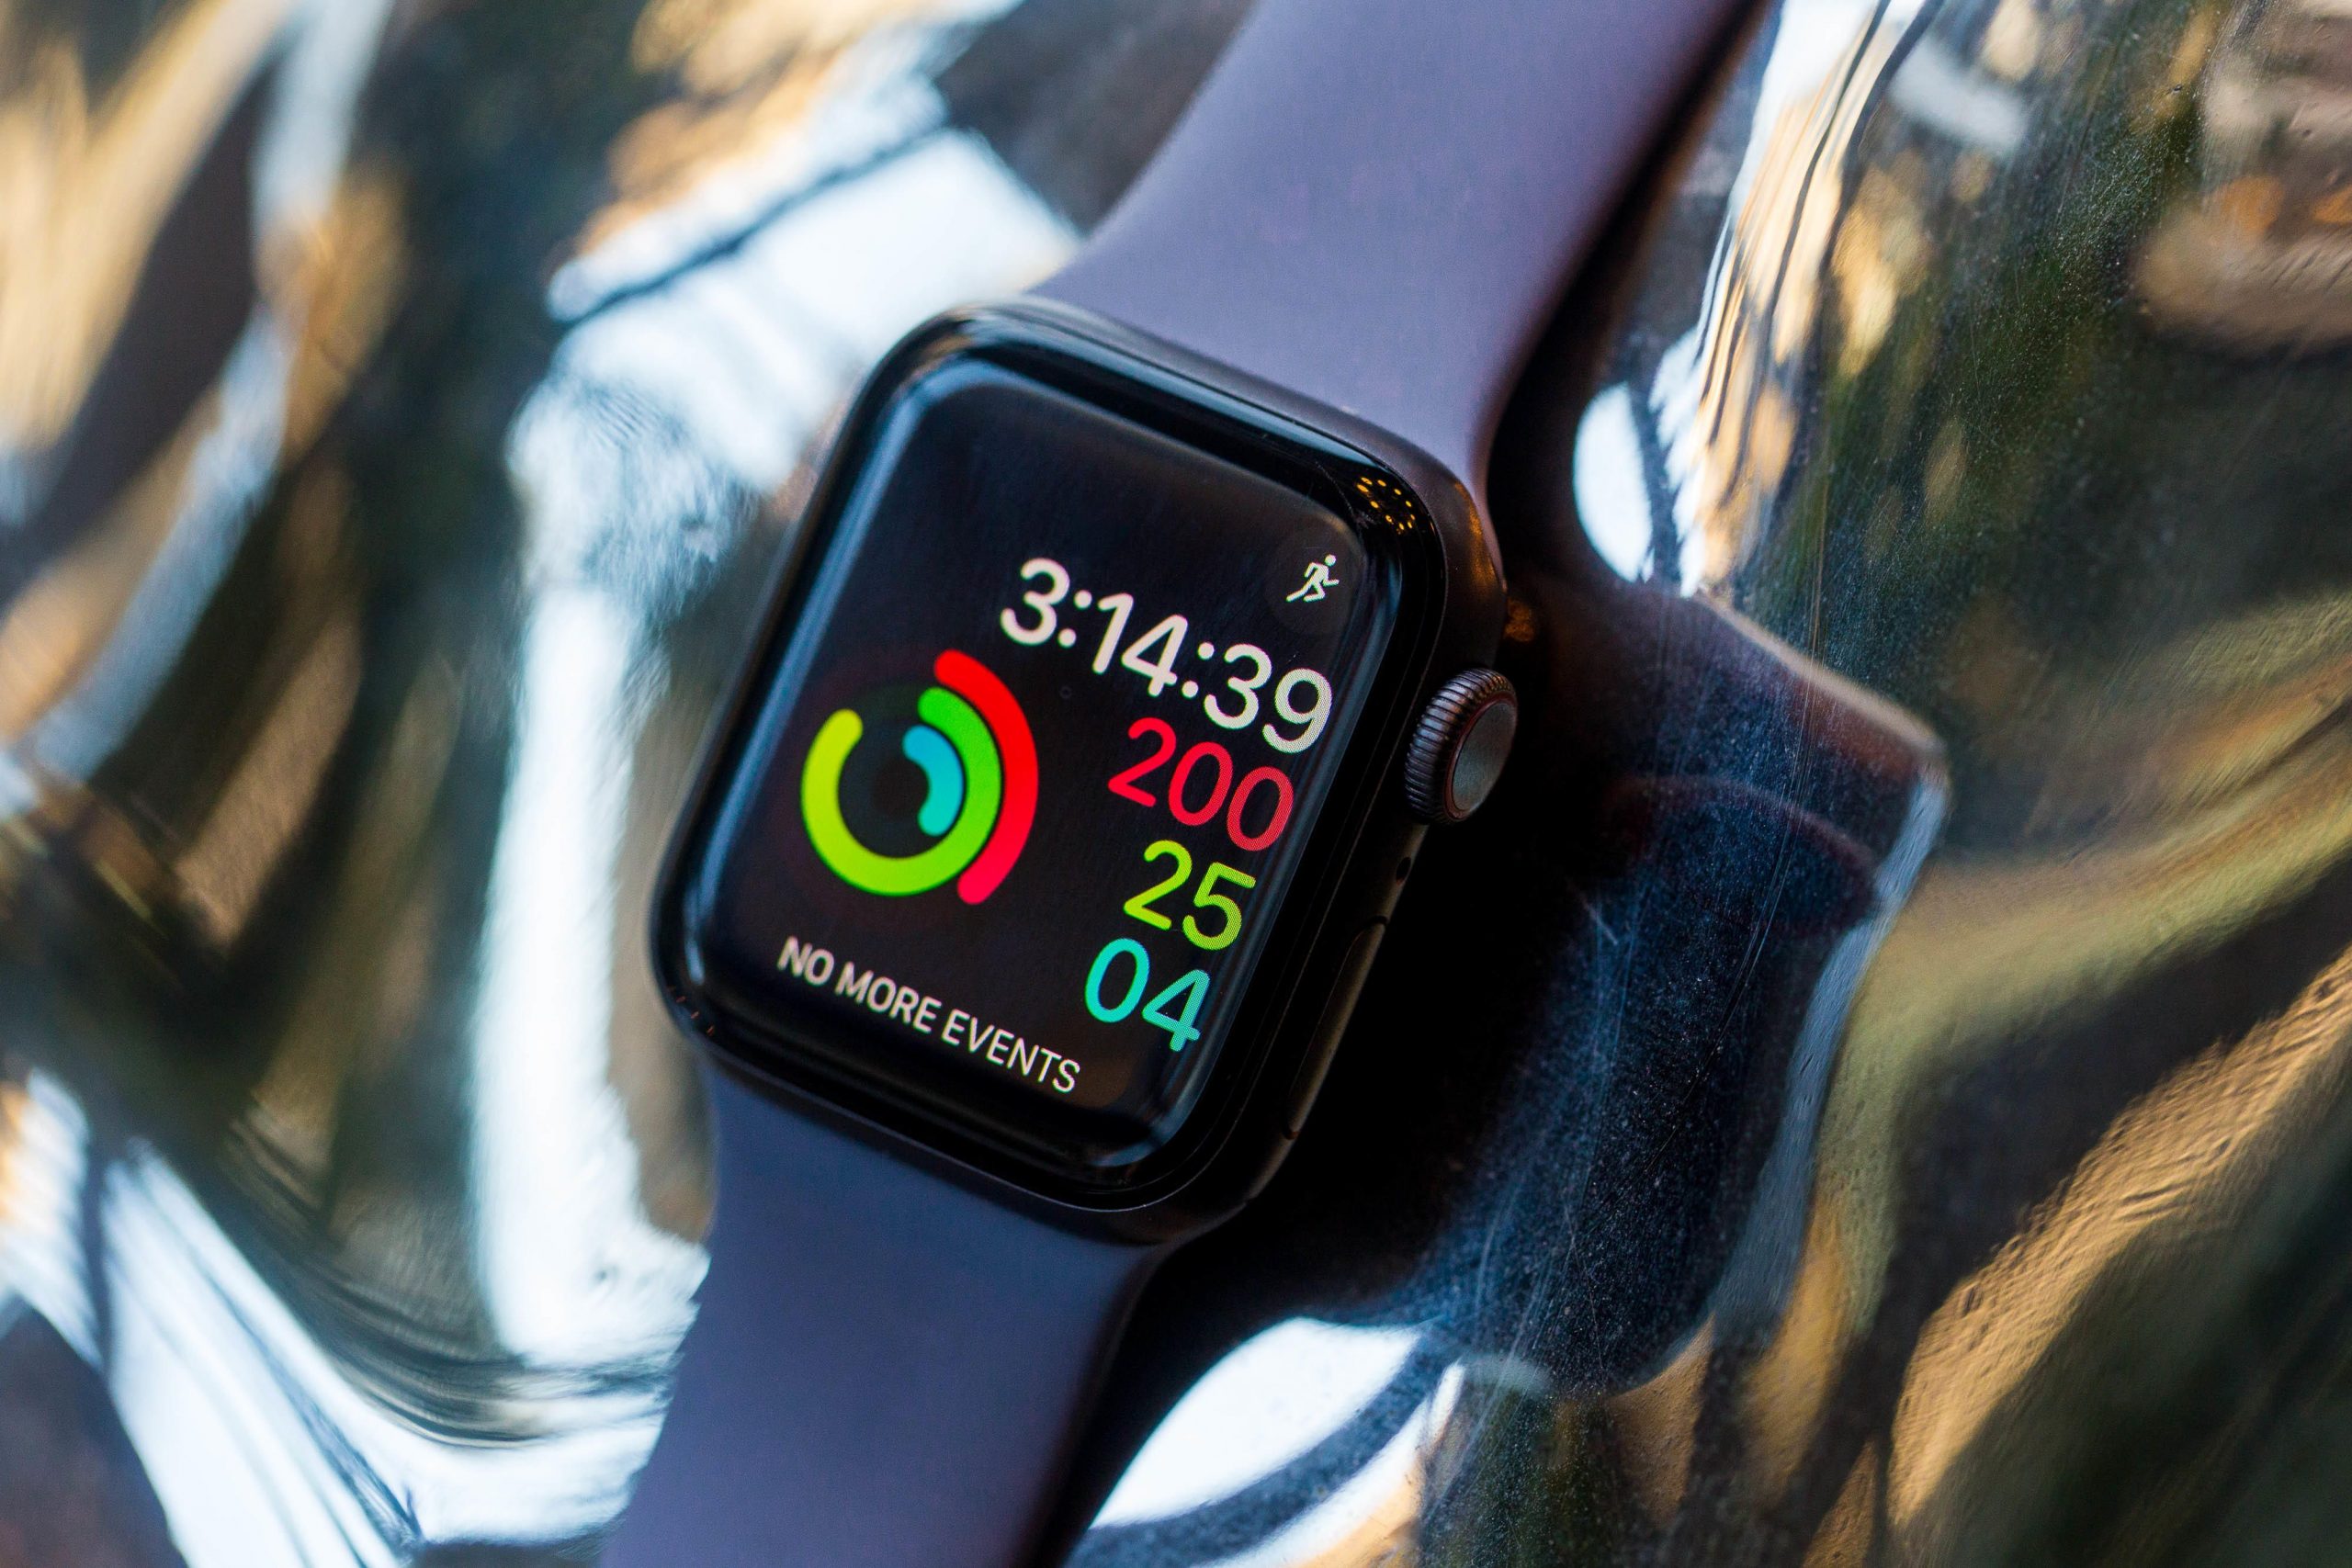 "Apple Watch Series 5" will arrive in the last quarter, according to an analyst